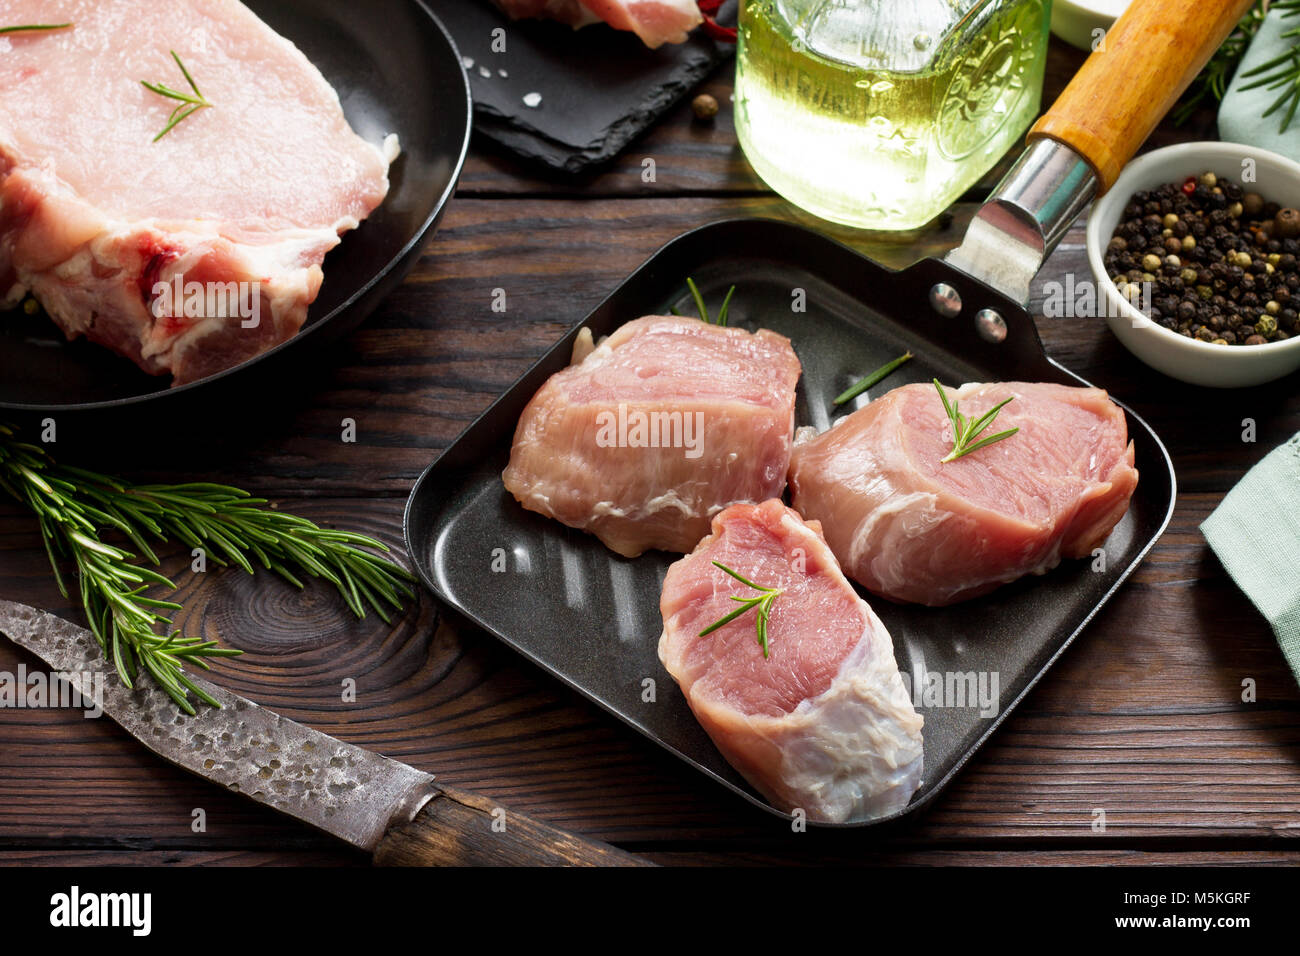 Fresh various meat. Raw pork steak and cutlets on a cast iron frying pan, spices and fresh rosemary on a kitchen wooden table. Stock Photo